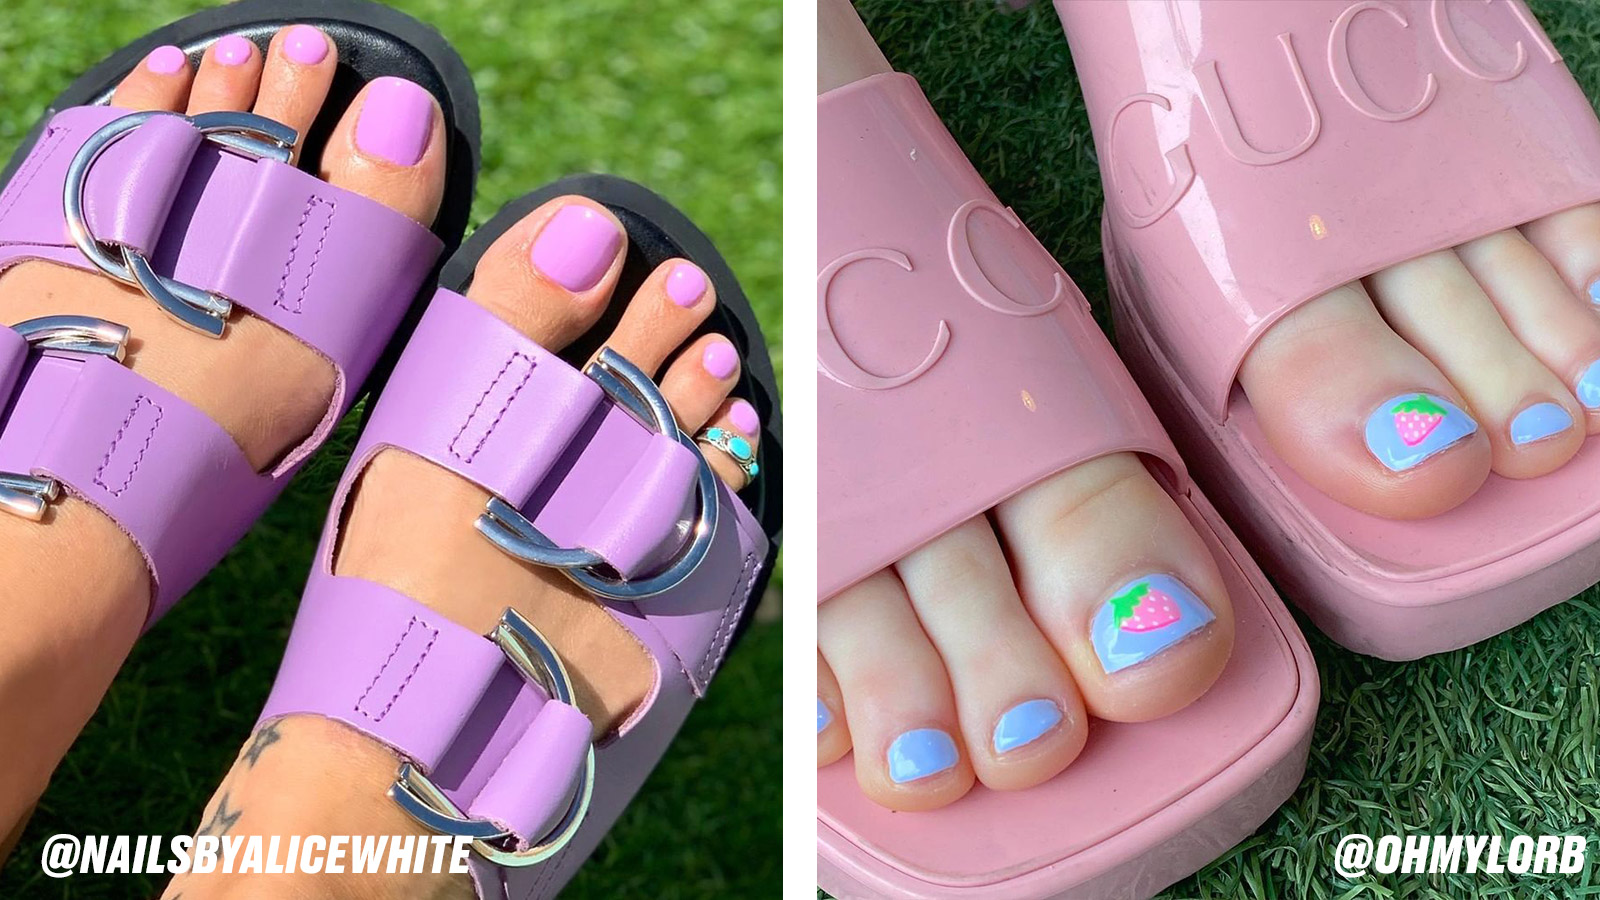 2. "Cute and Colorful Painted Toe Nail Art Ideas" - wide 9